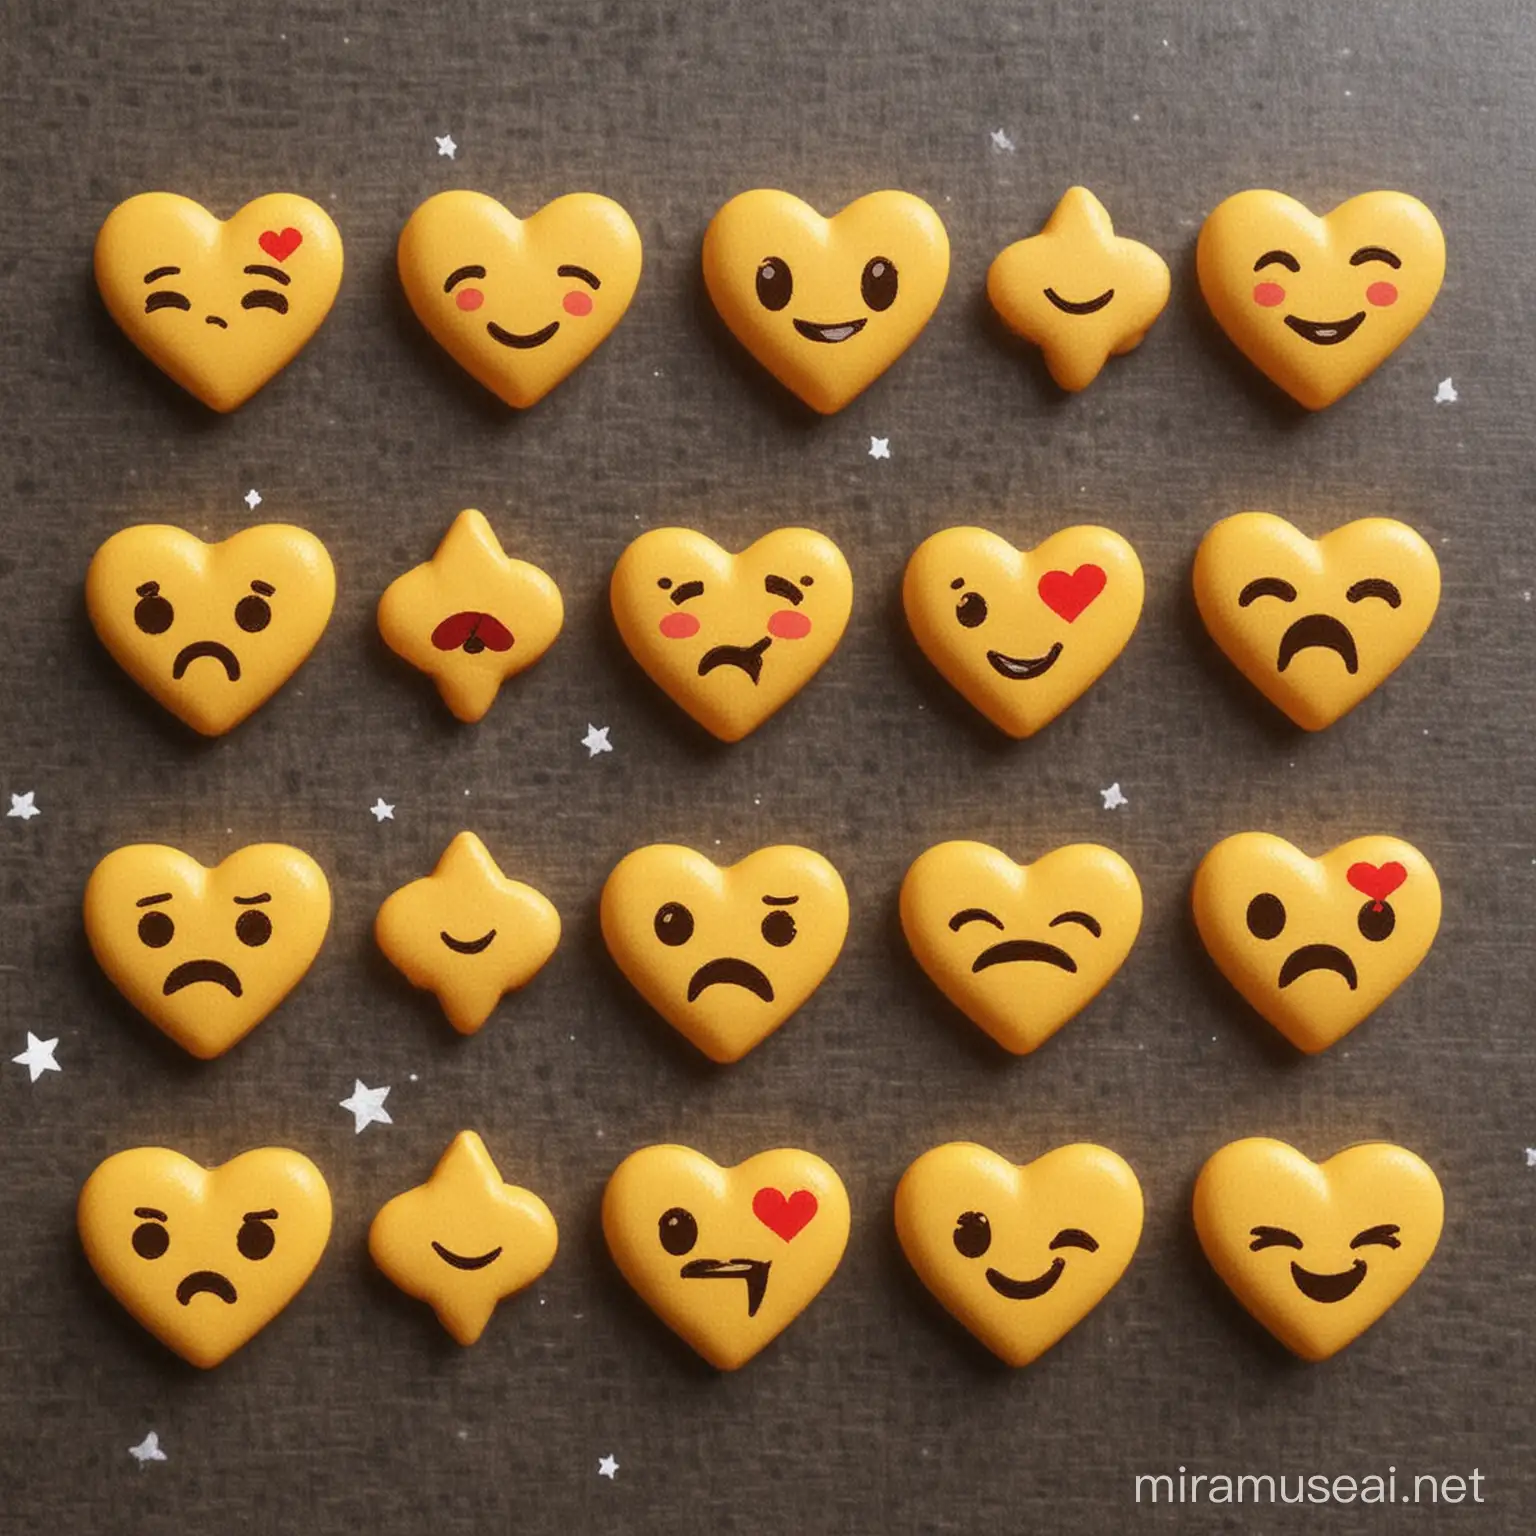 I would like you to produce some symbols- emojis that I can use in the background of my photos when i do the editing. Use little stars or hearts to produce this pattern of symbols. I want these to be small symbols in a continous pattern. 

